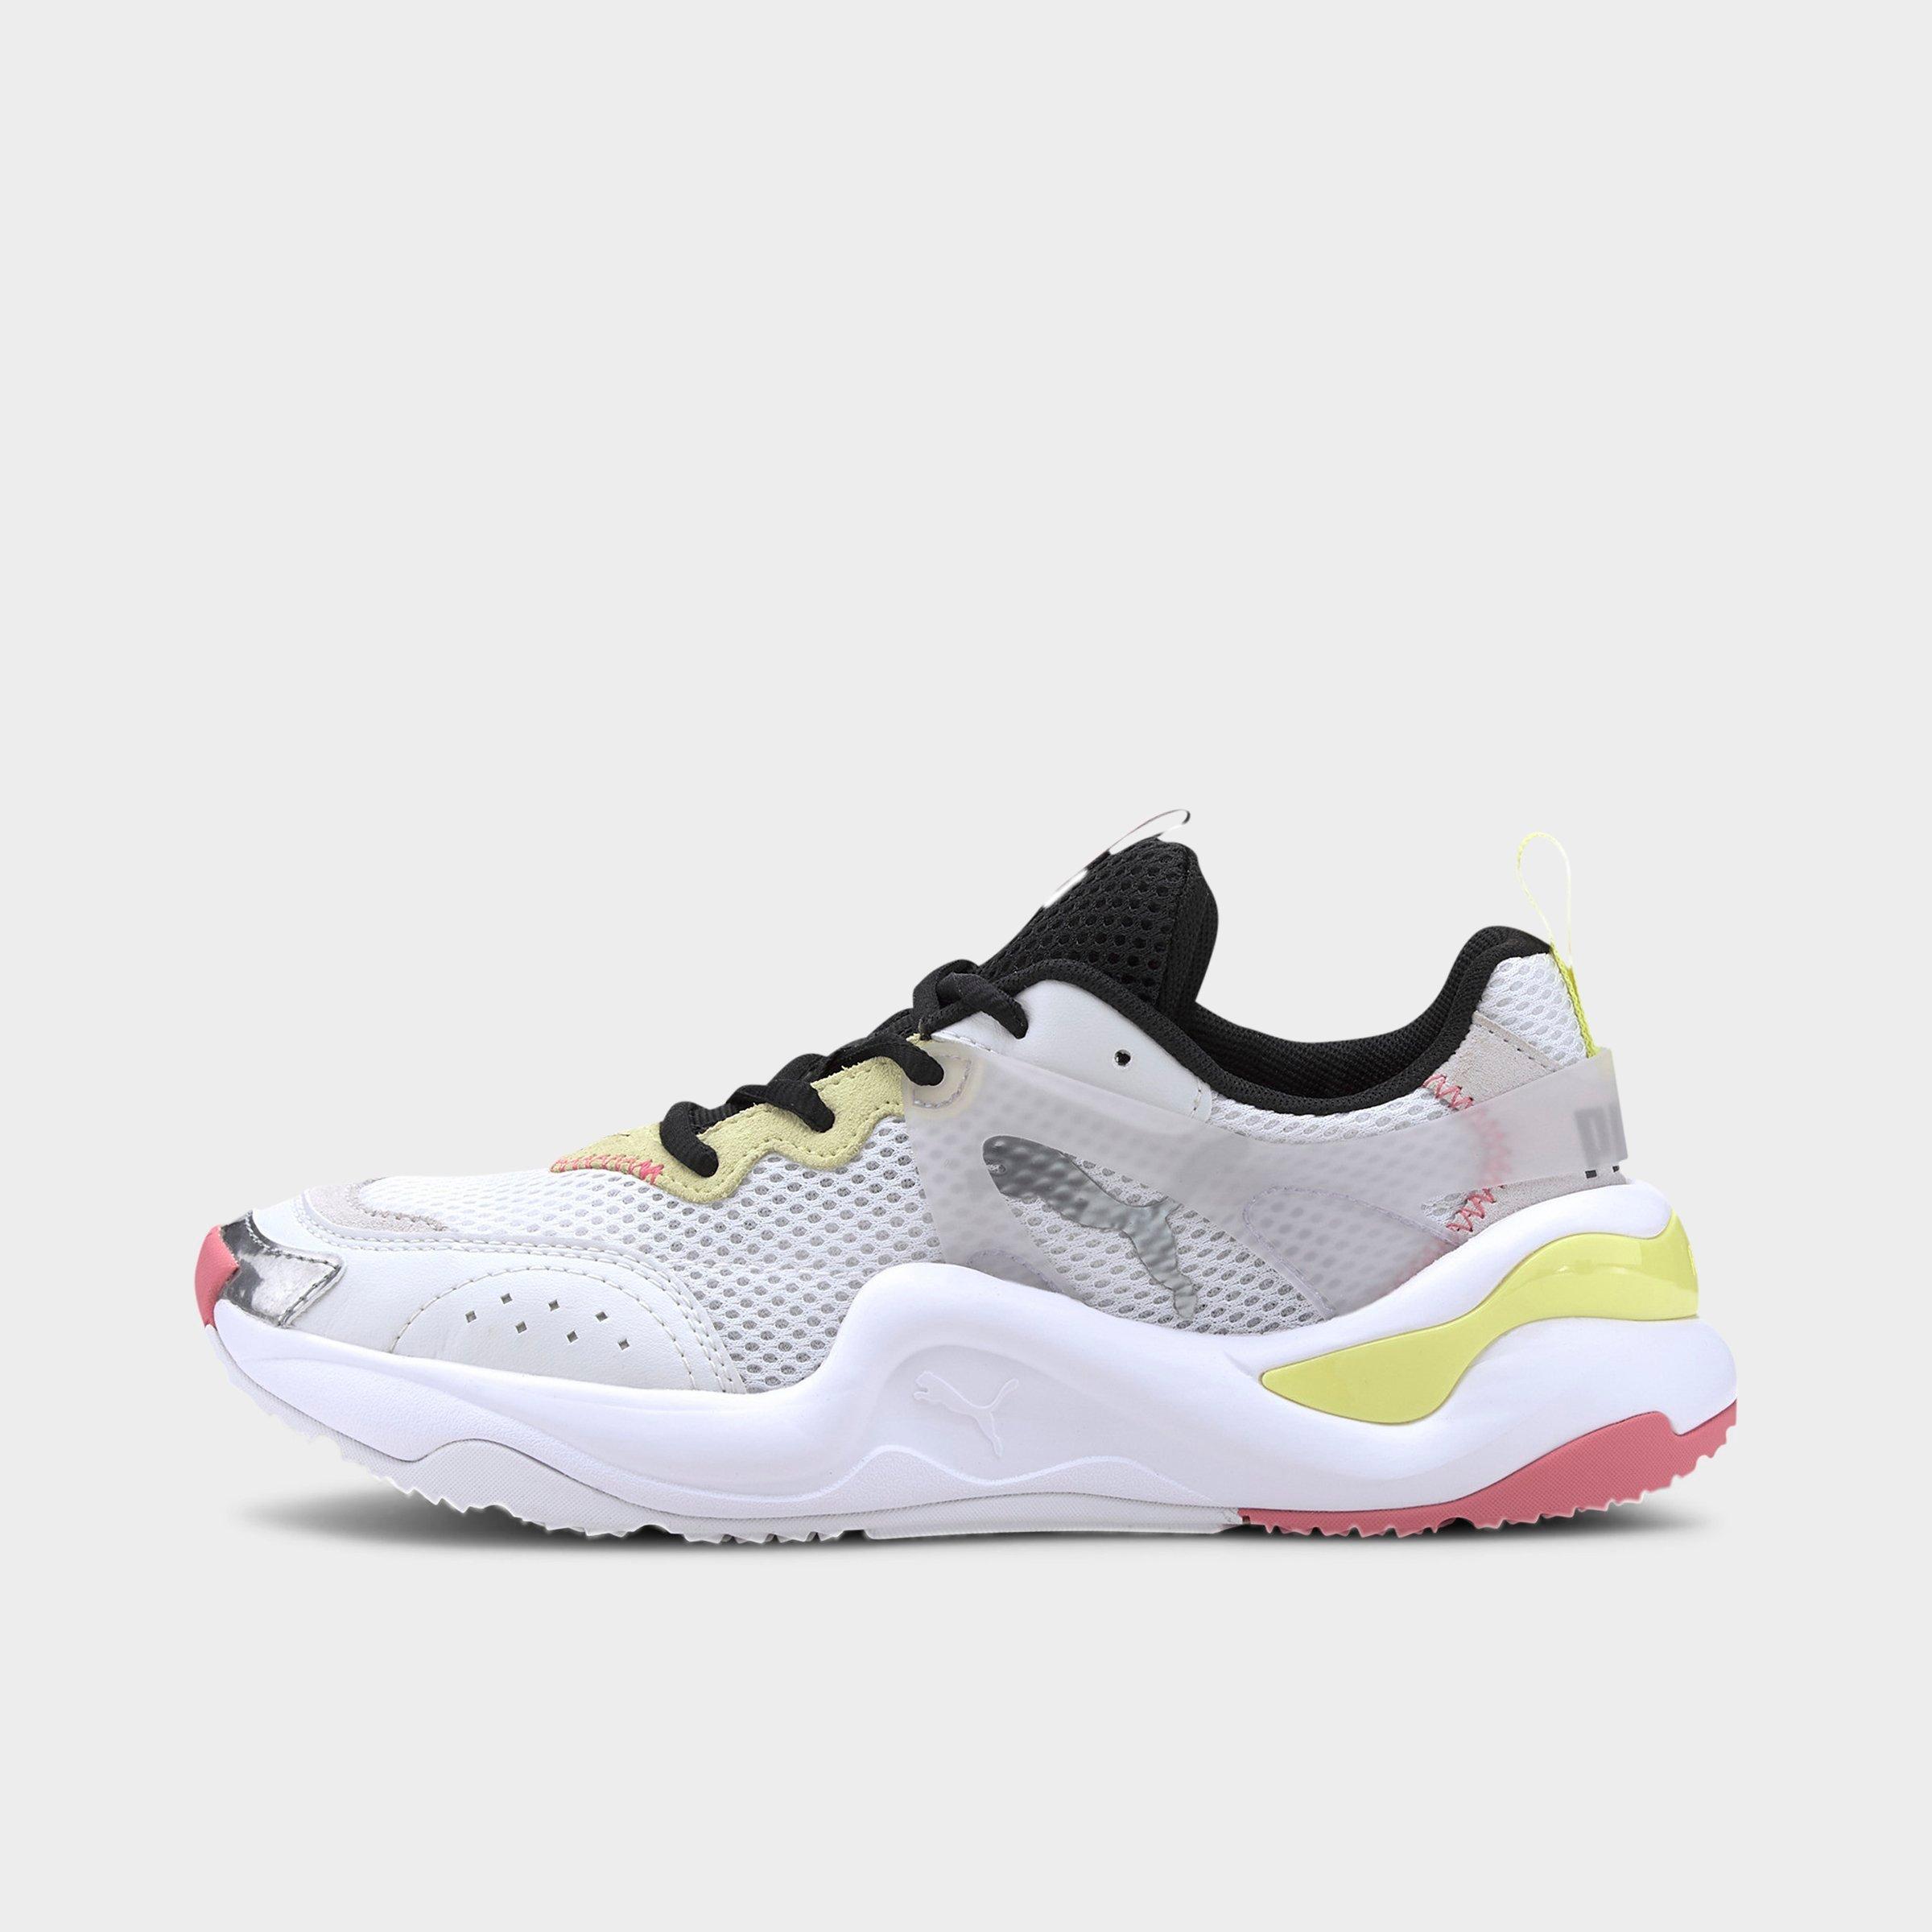 womens tennis shoes finish line